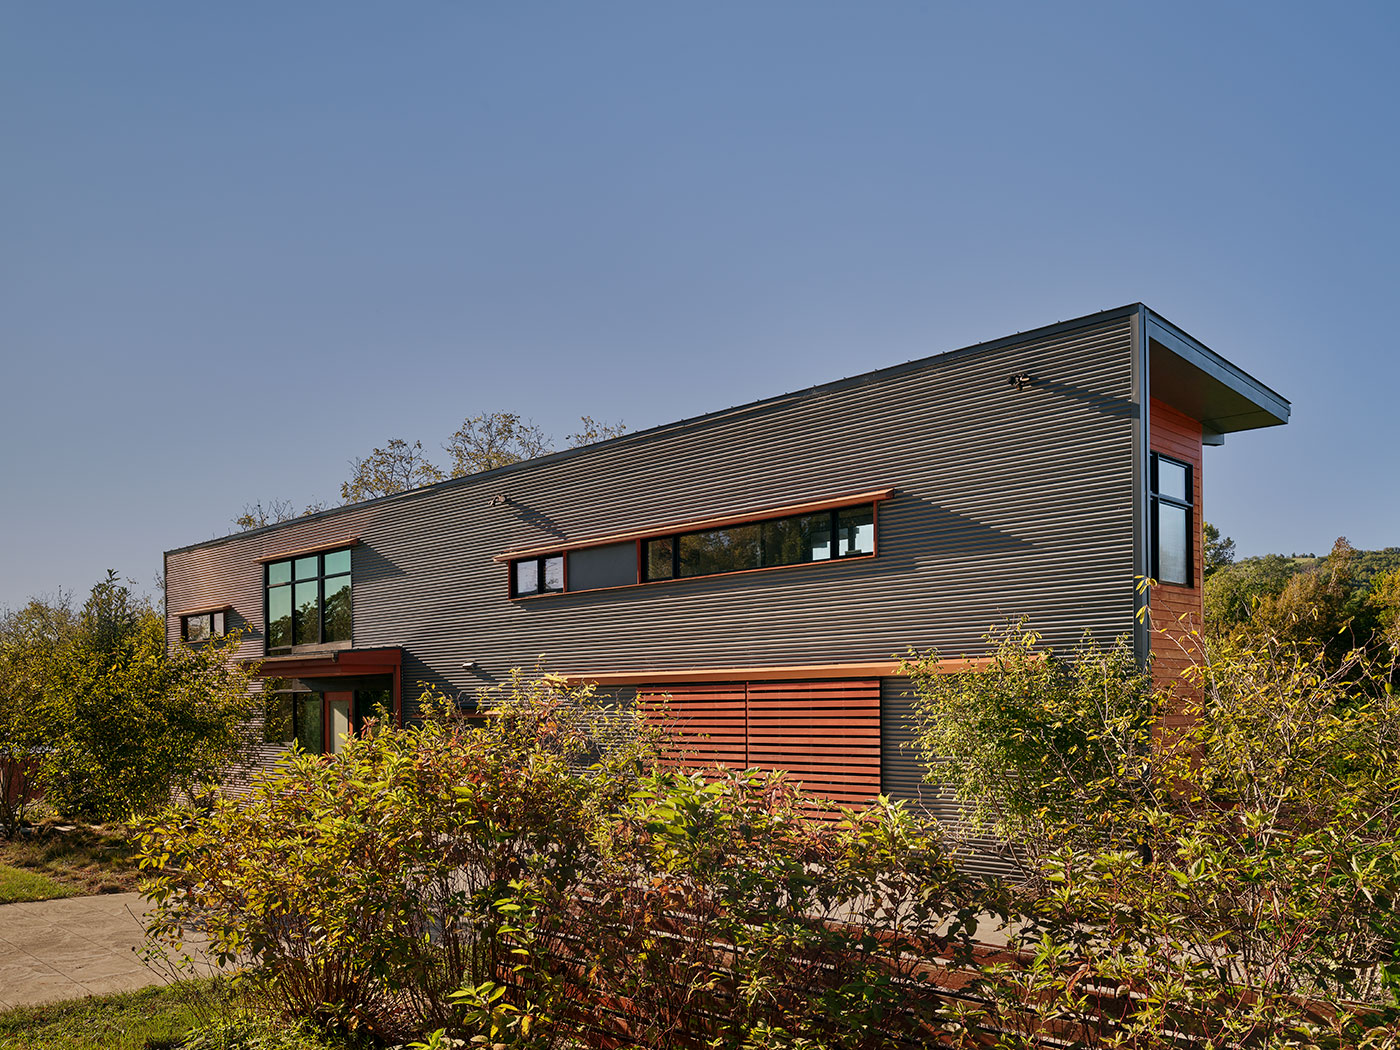 Corrugated Grey Siding with Sliding Garage Doors, Long Glass Windows, Cantilevered Wood Canopy in Charlottesville, VA by Chris Hays Modern Green Architect with HEDS.